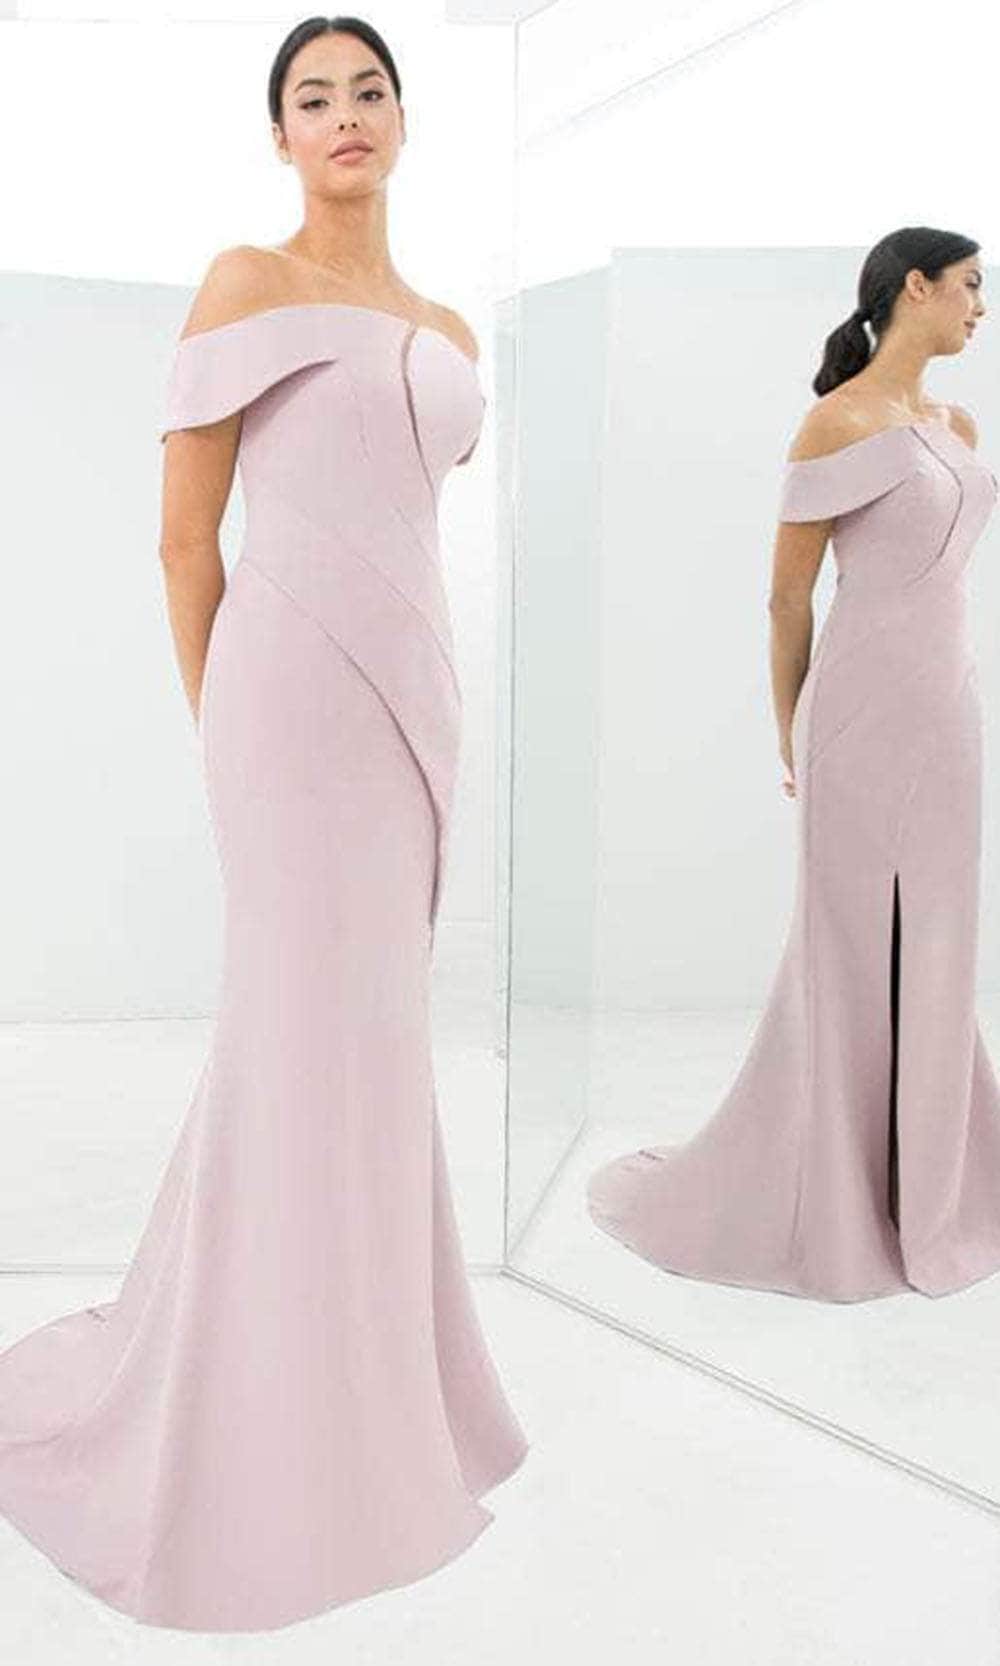 Alexander By Daymor 1373 - Off-Shoulder Cutout Formal Gown Special Occasion Dress